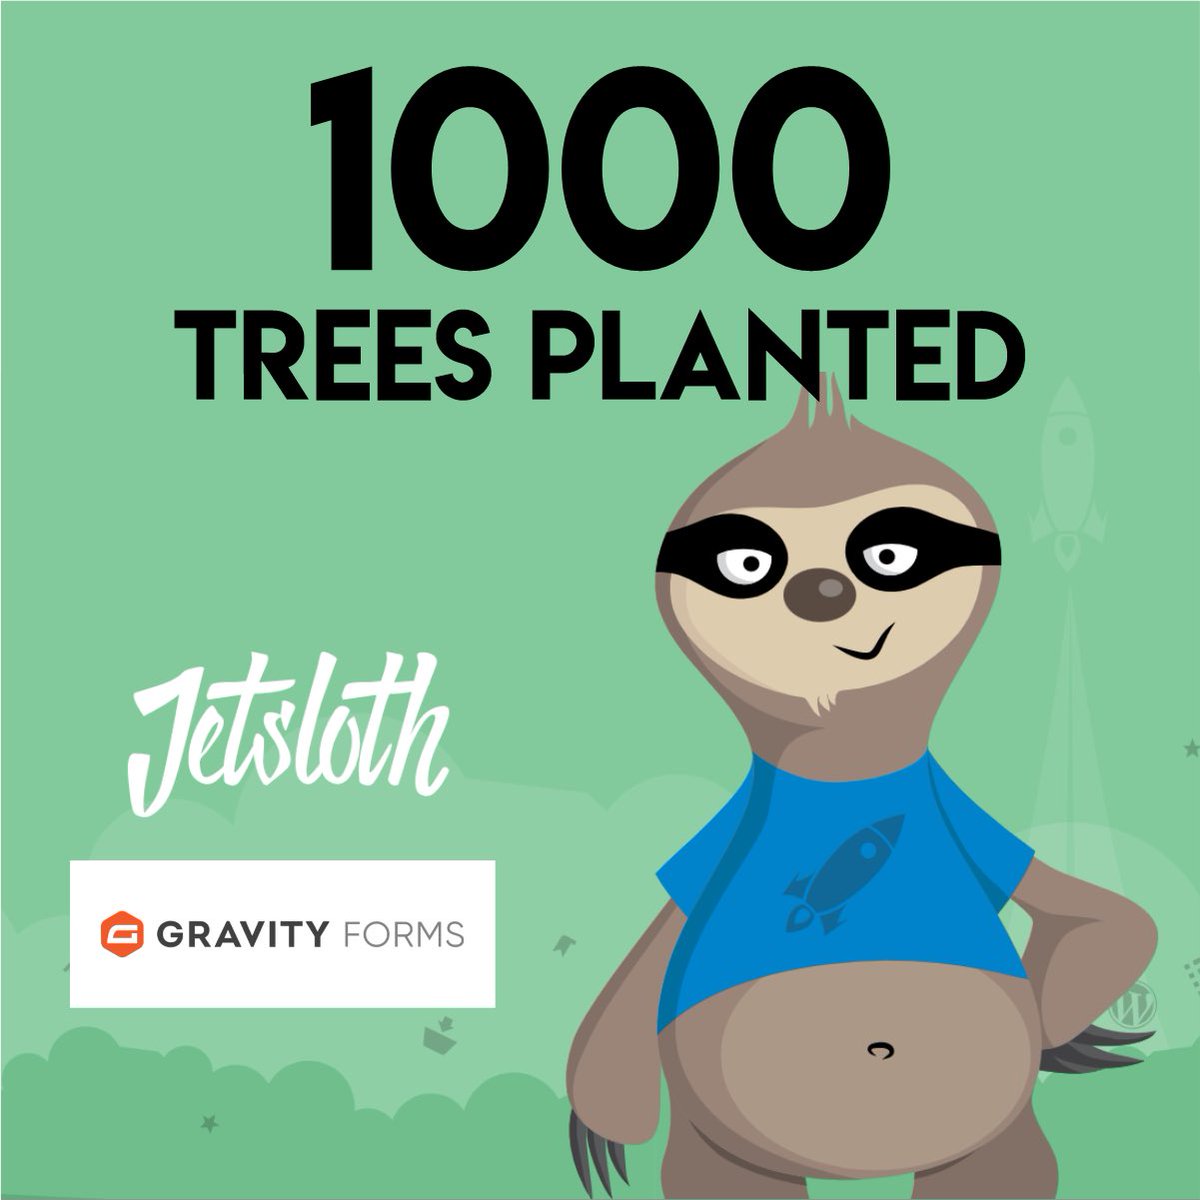 1000 more trees planted!! 🌳 Our friends at JetSloth and Gravity Forms generously donated $10,000 to plant 1000 trees in the South Caribbean of Costa Rica! 🌱

Thank You, to our special corporate partners for helping us help sloths! 🌳
 #TreesPlanted #CorporatePartners